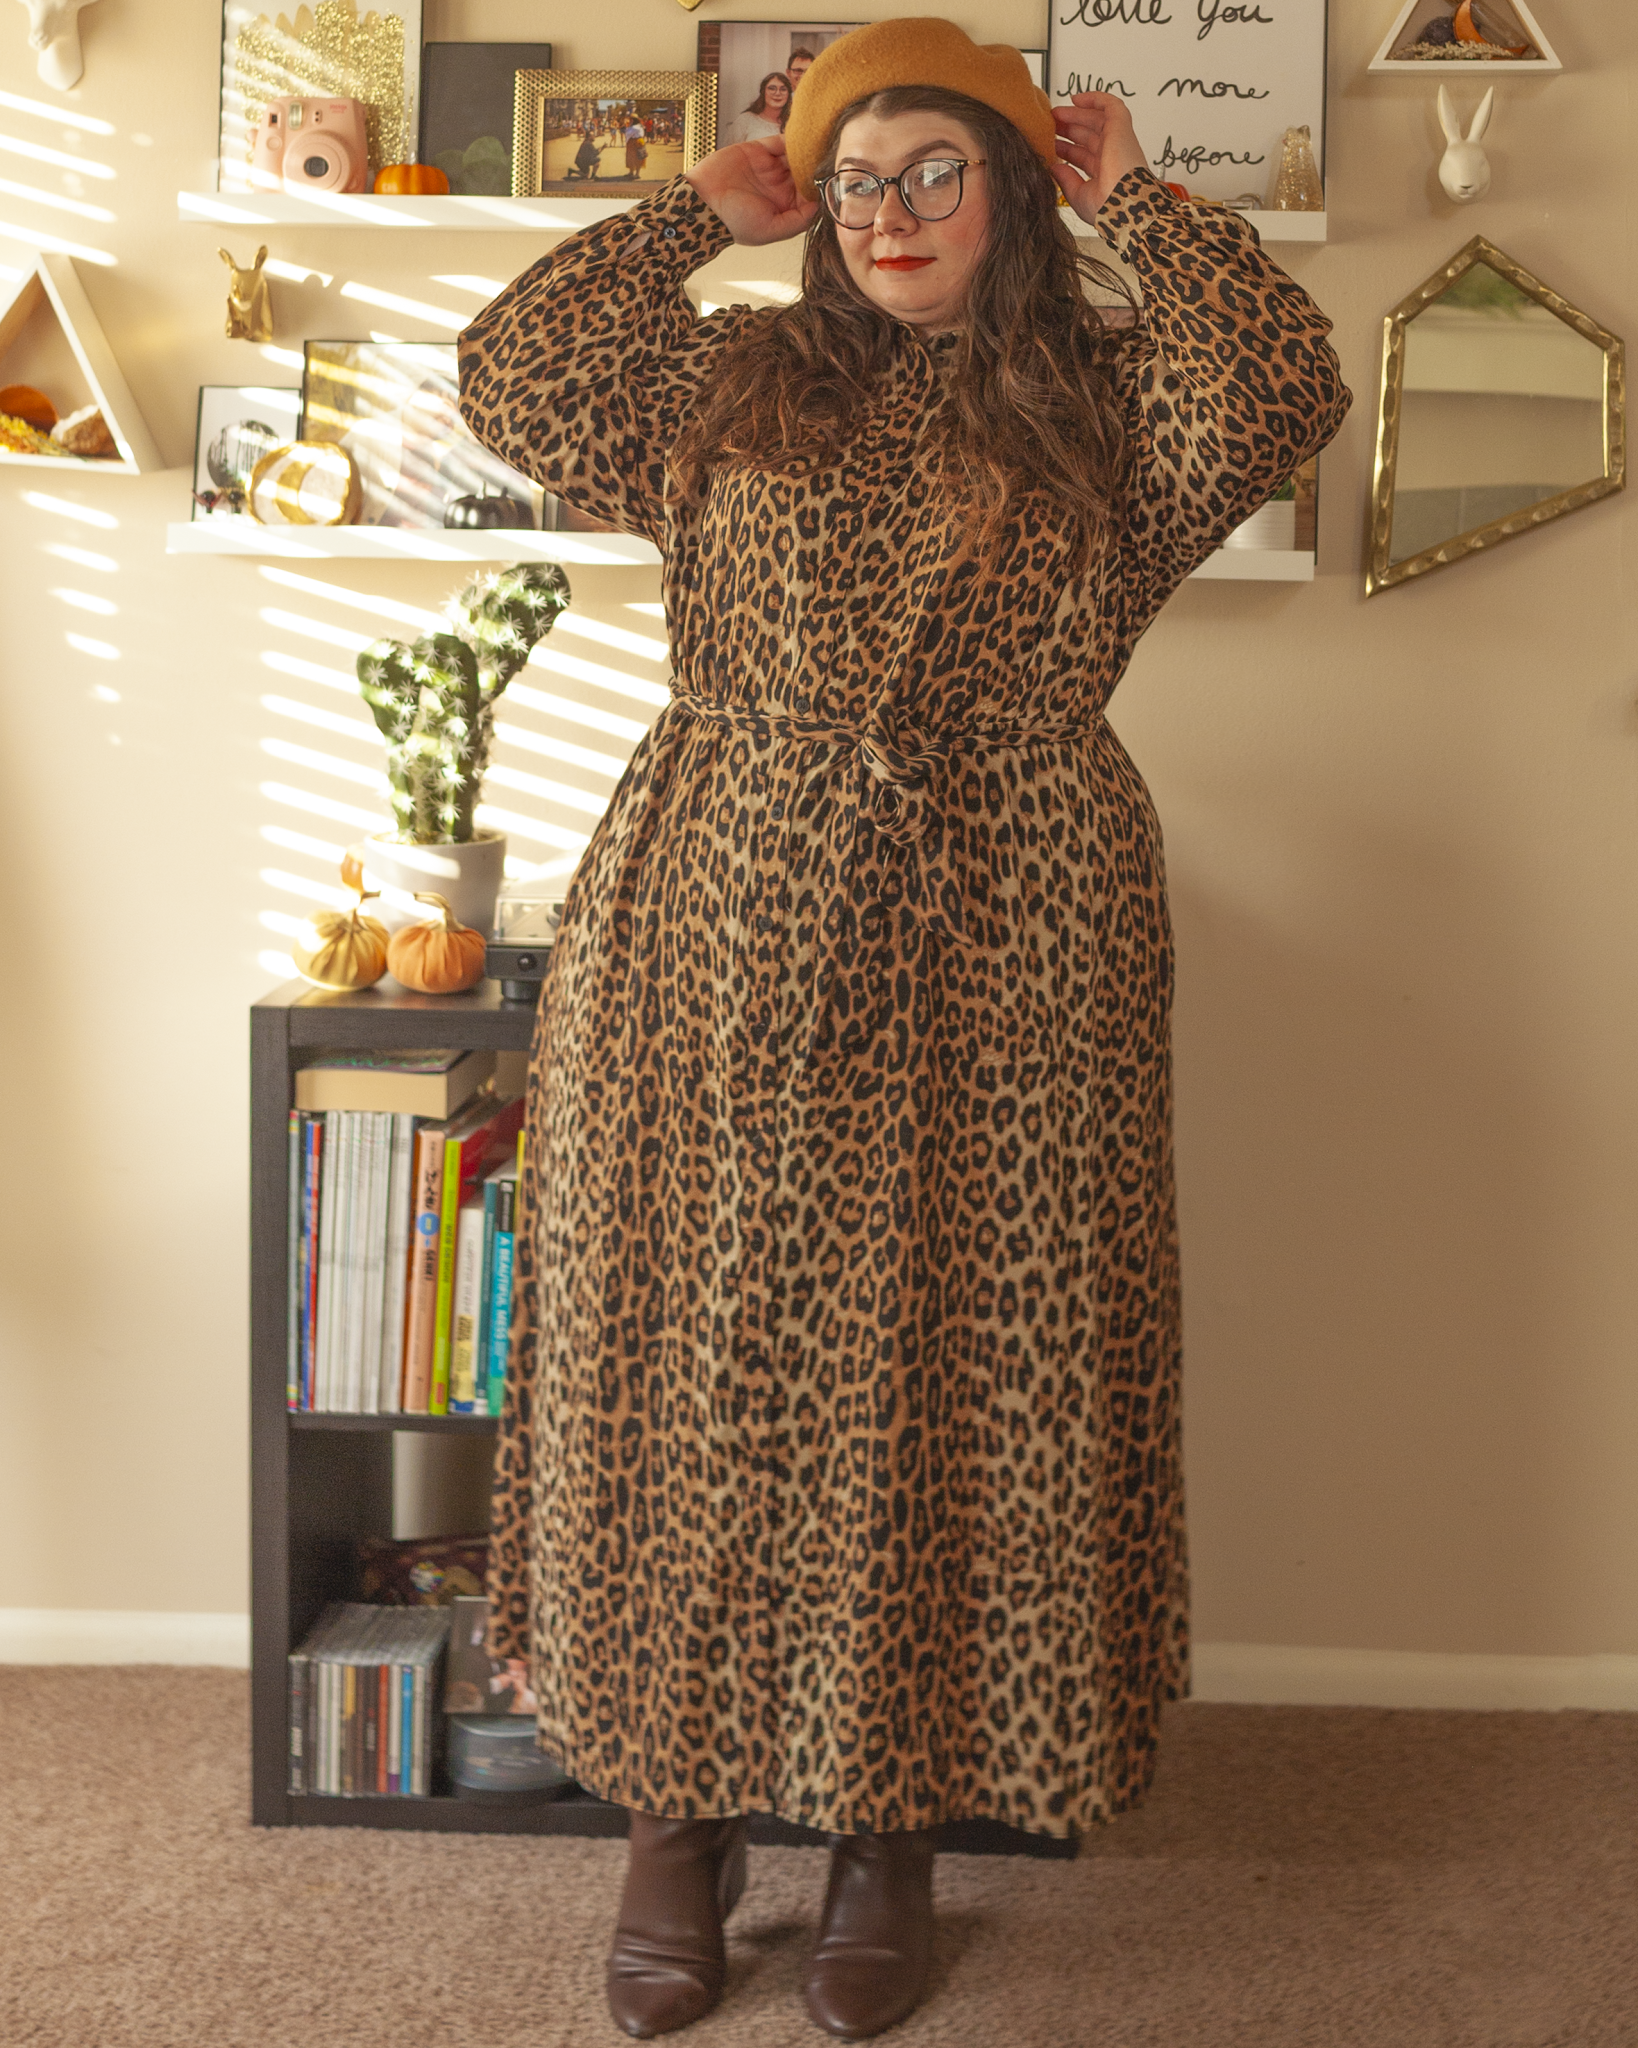 An outfit consisting of a camel brown beret, long sleeve leopard print button down maxi dress, tied around the waist with a connected leopard print tie, and brown midi boots.